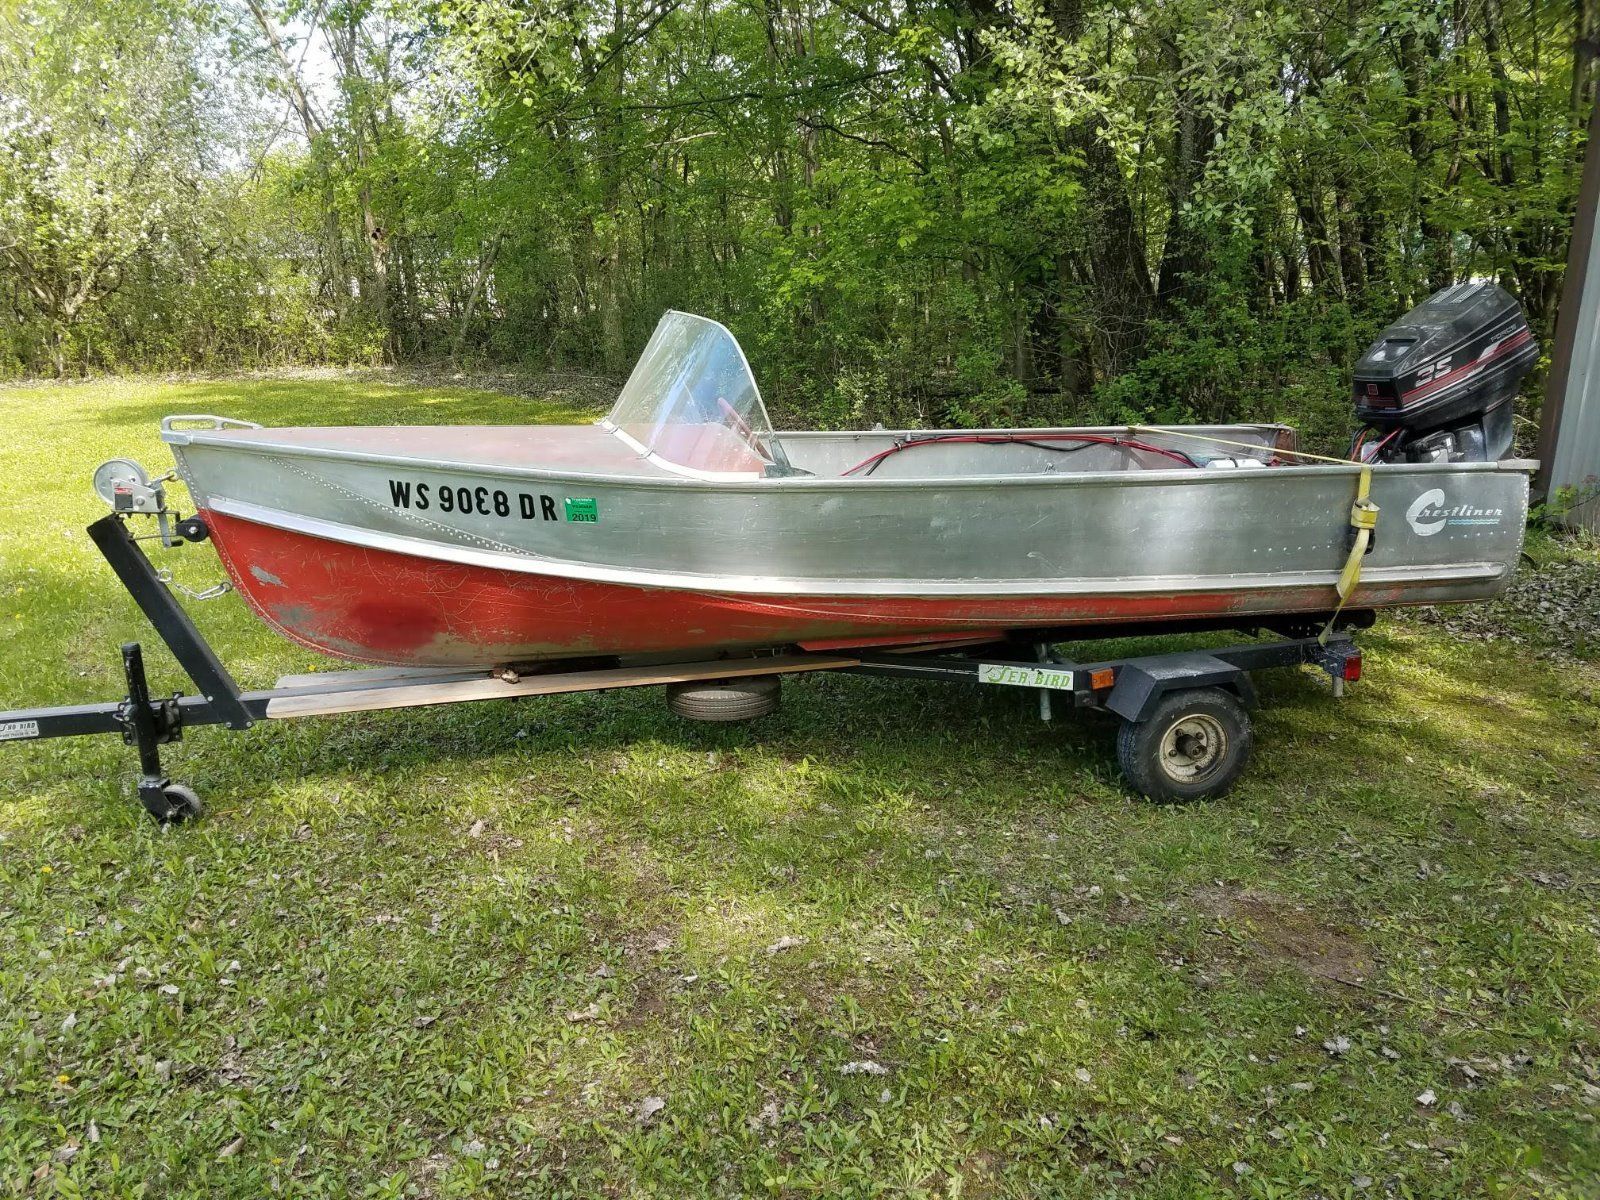 crestliner 1955 for sale for ,500 - boats-from-usa.com